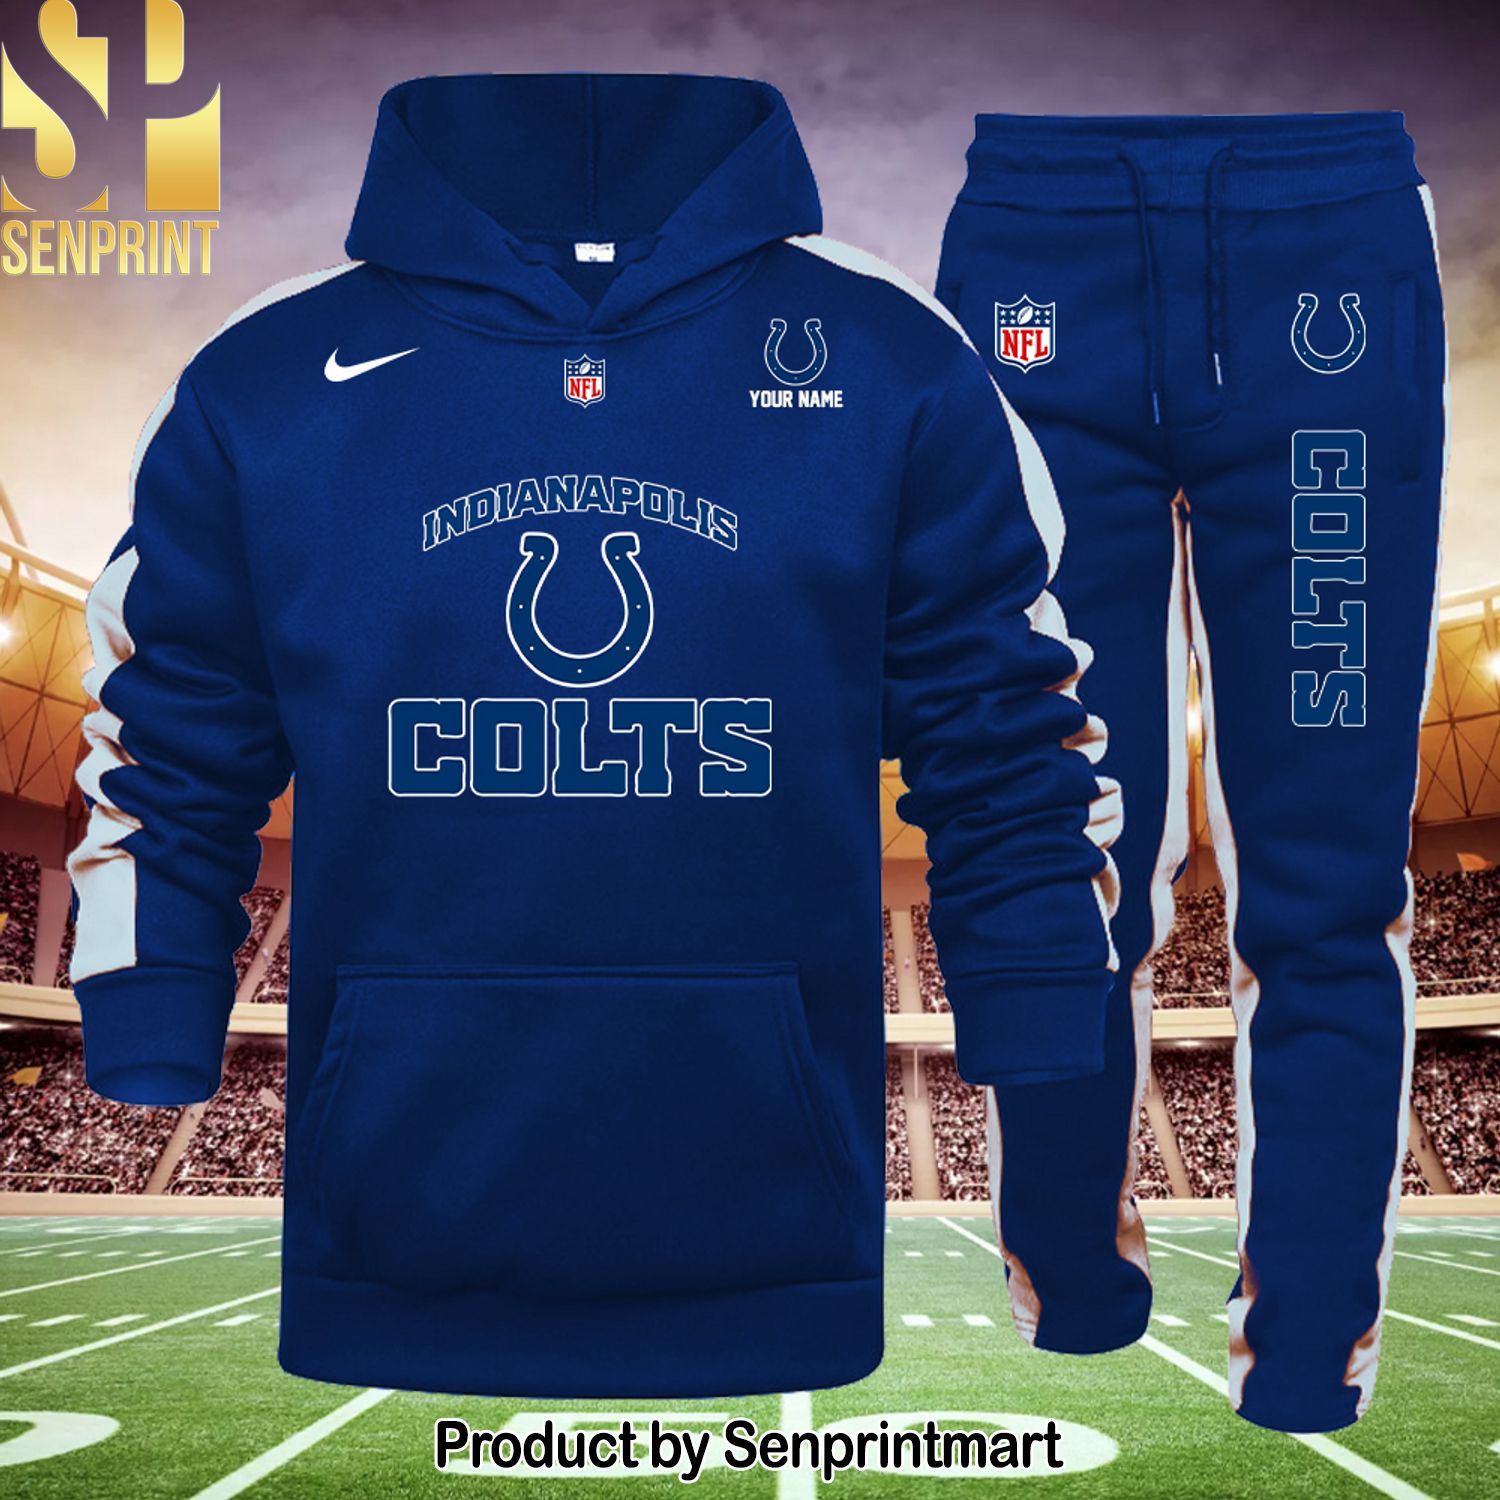 NFL Indianapolis Colts All Over Print Unisex Shirt and Sweatpants